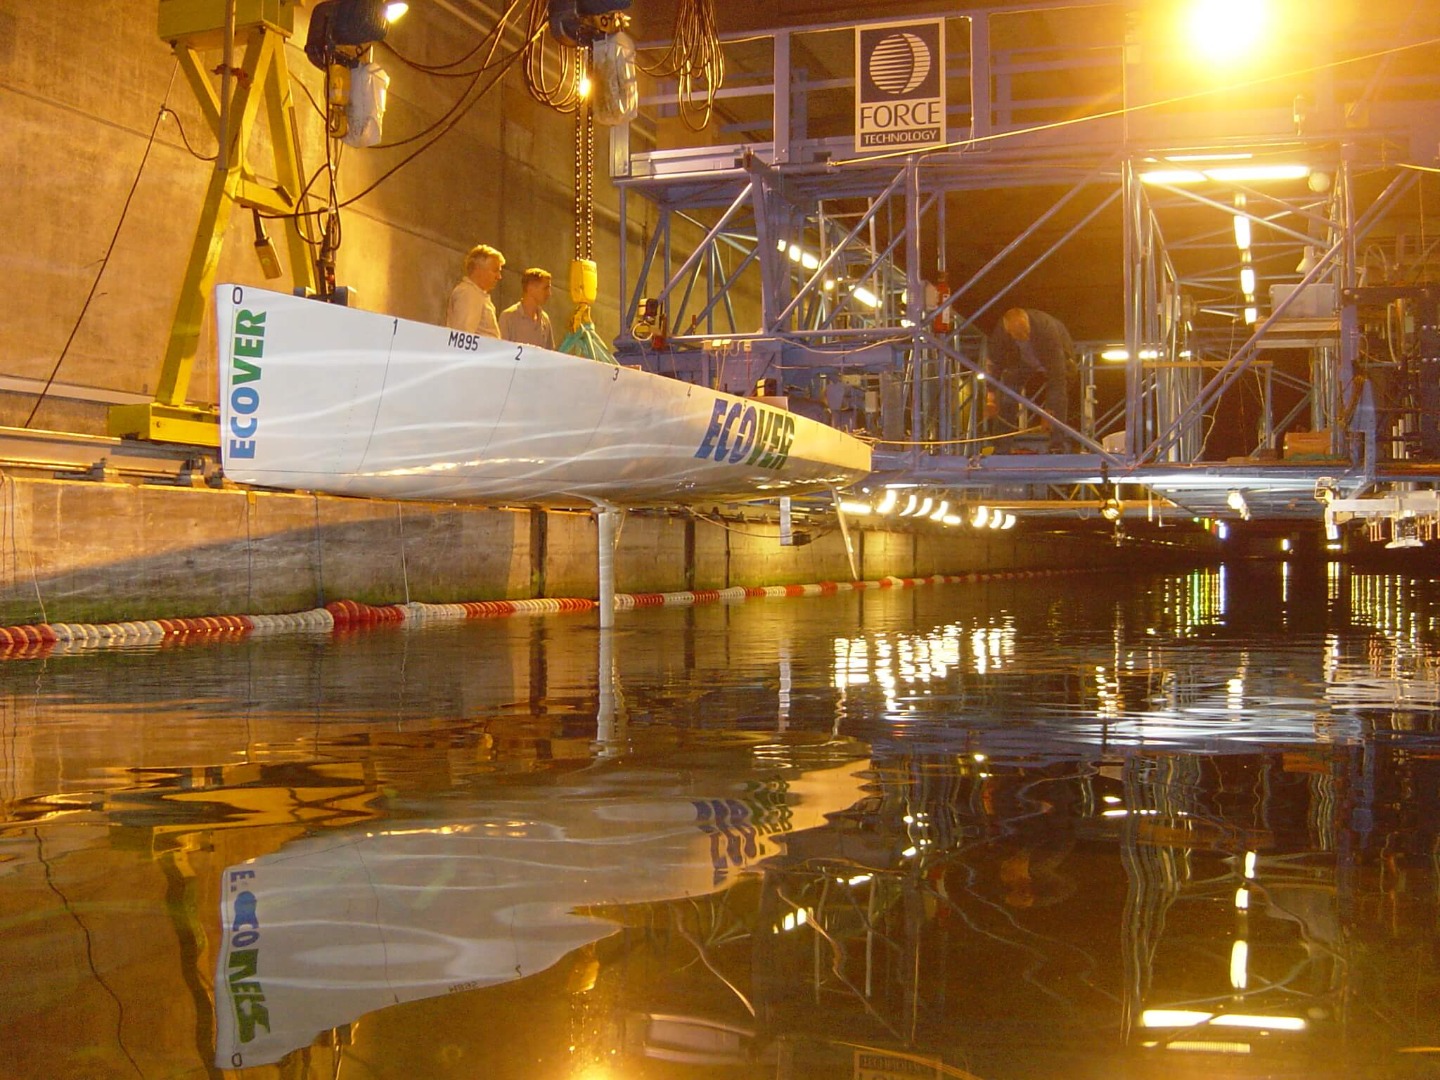 This is a photograph taken during the 1/3rd scale towing tank model testing undertaken on the Owen Clarke / Clay Oliver designed IMOCA 60 Ecover 3 in 2005. During these tests an interceptor trim control system, such had been previously fitted to Russian Navy fast attack craft was investigated and subsequently fitted to sisterships Ecover 3 and Aviva. When Ecover 3 took part in the 2007 TJV, this was the first time an interceptor system had been used by a sailing yacht. The system was subsequently banned by the IMOCA class technical committee after both yachts raced with it in the 2008 Vendee Globe.